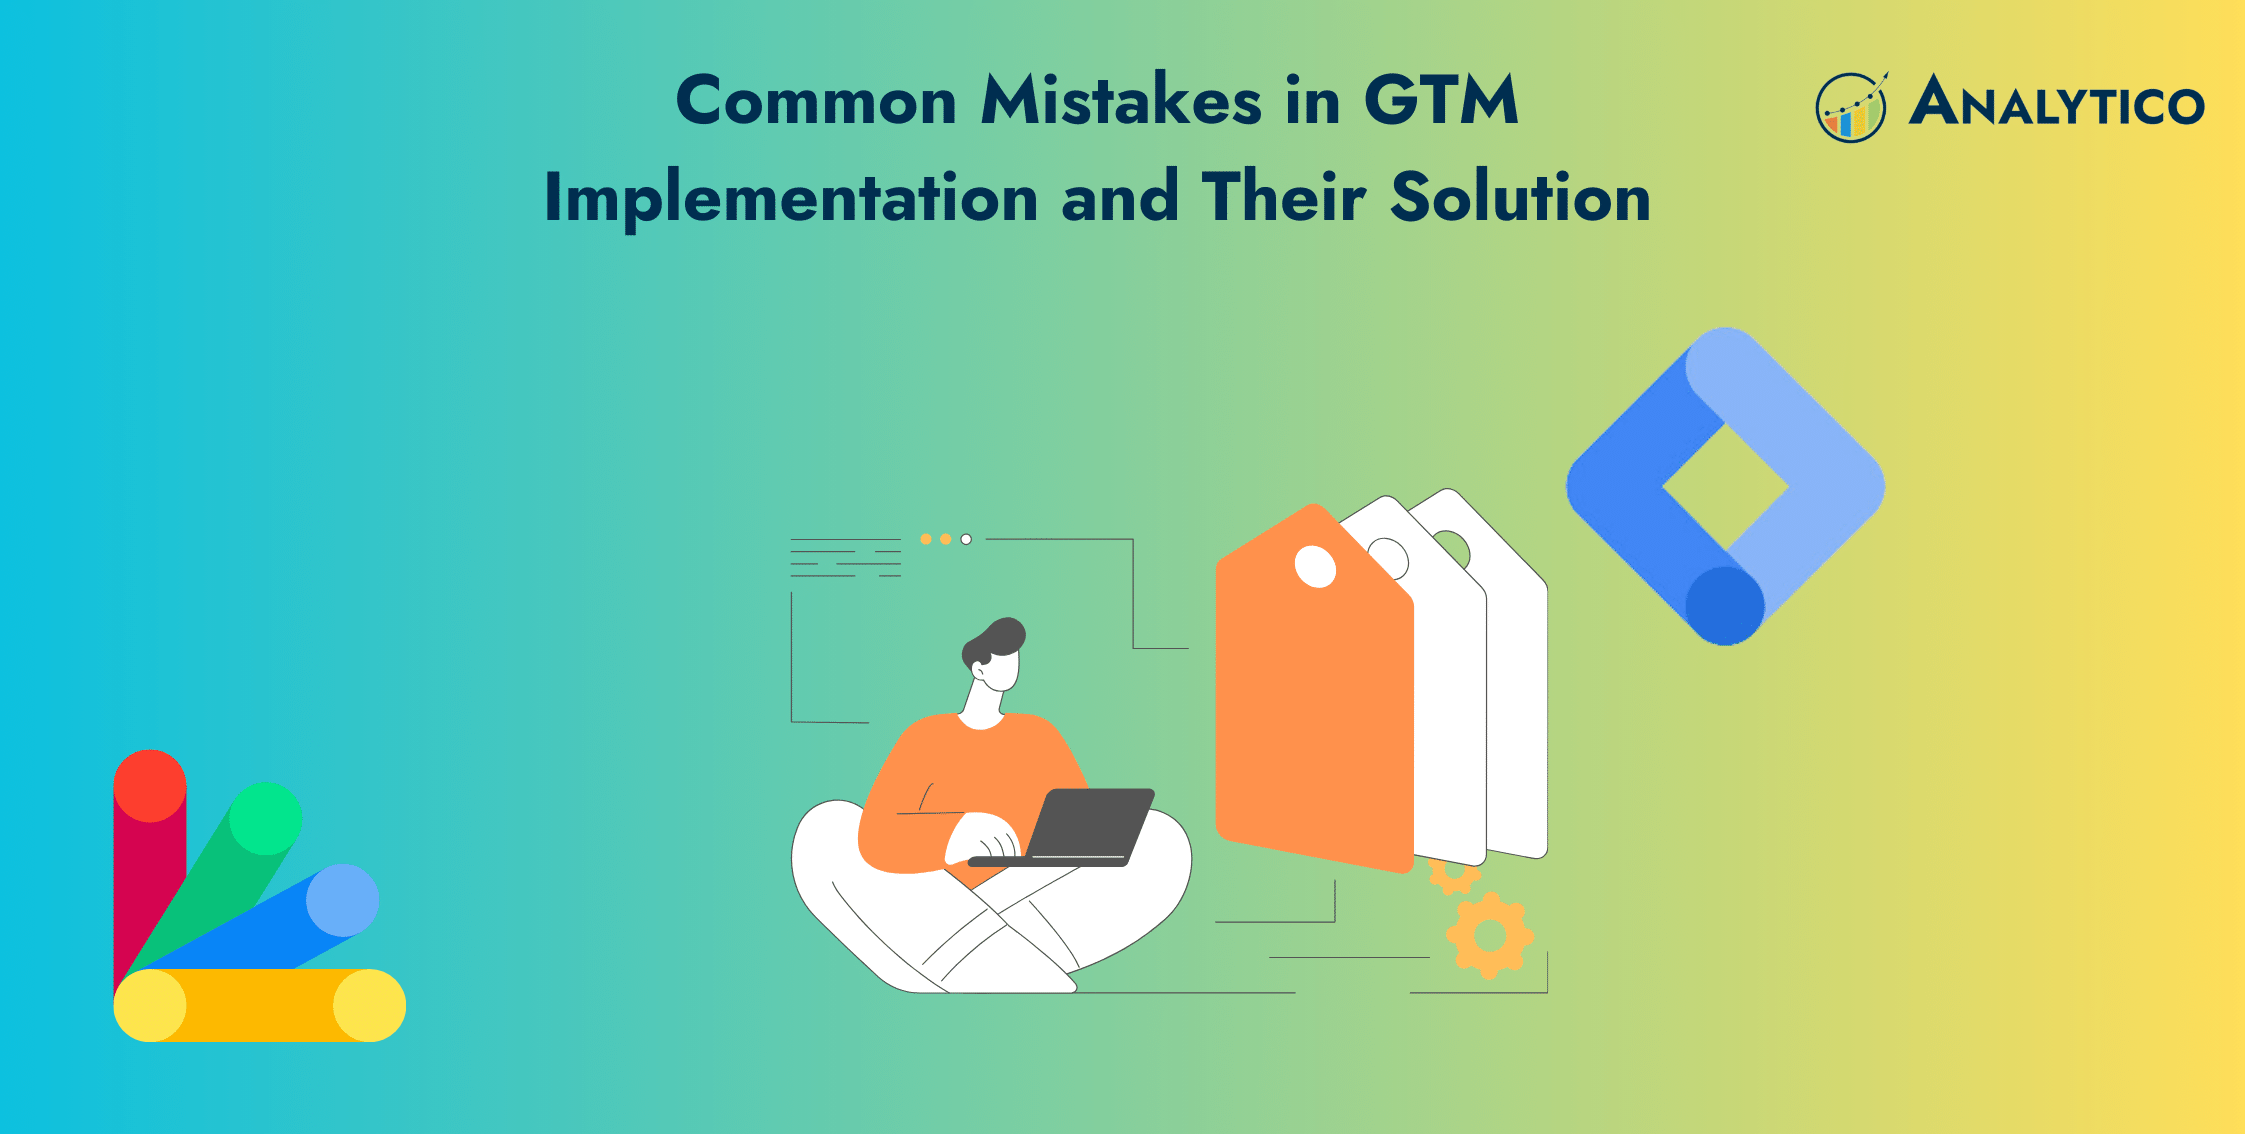 14 Common Mistakes in GTM Implementation and How to Fix Them